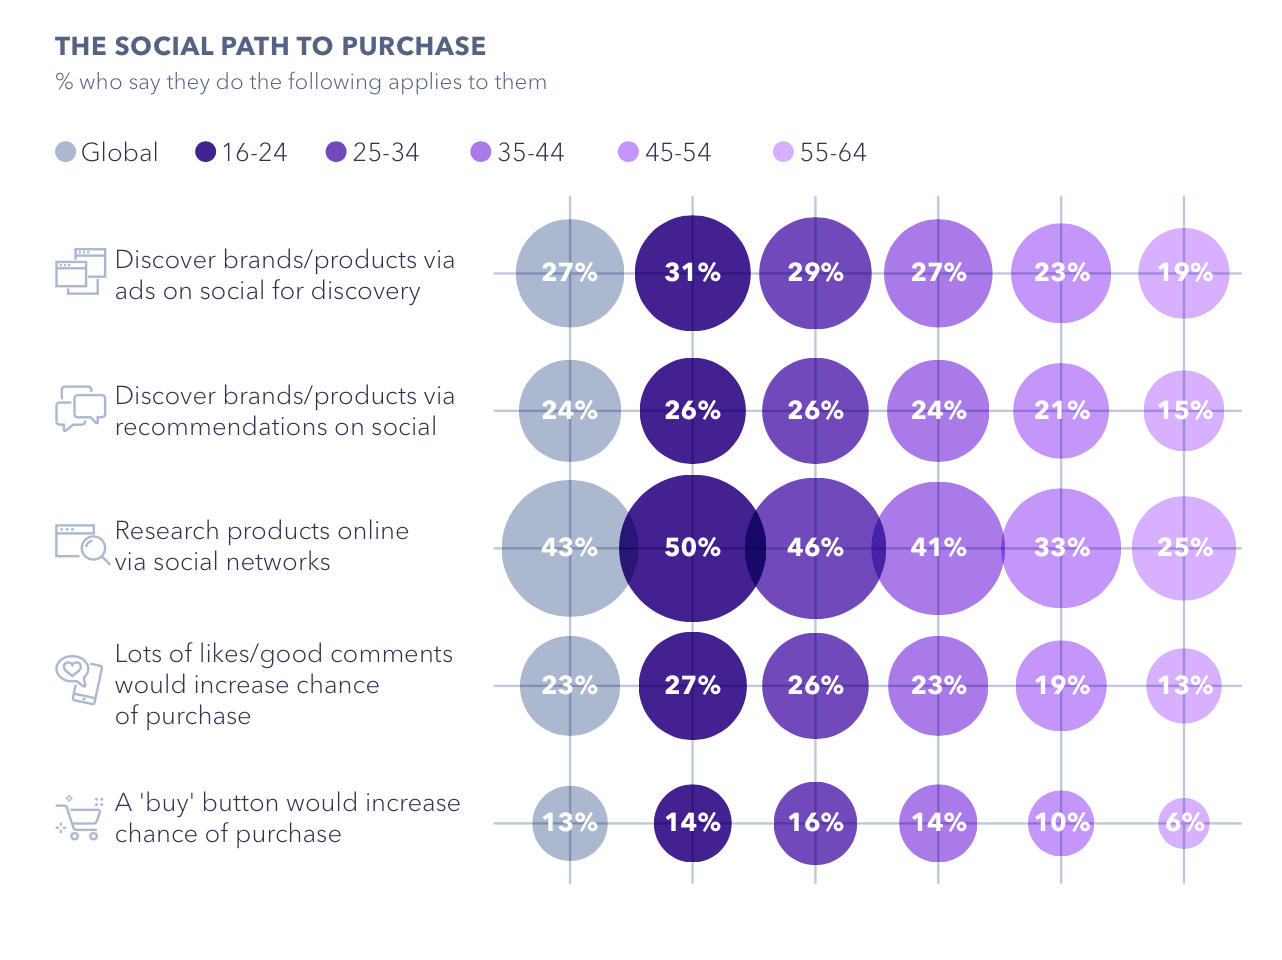 Social commerce will continue to grow ： purchase decisions are influenced by social media 